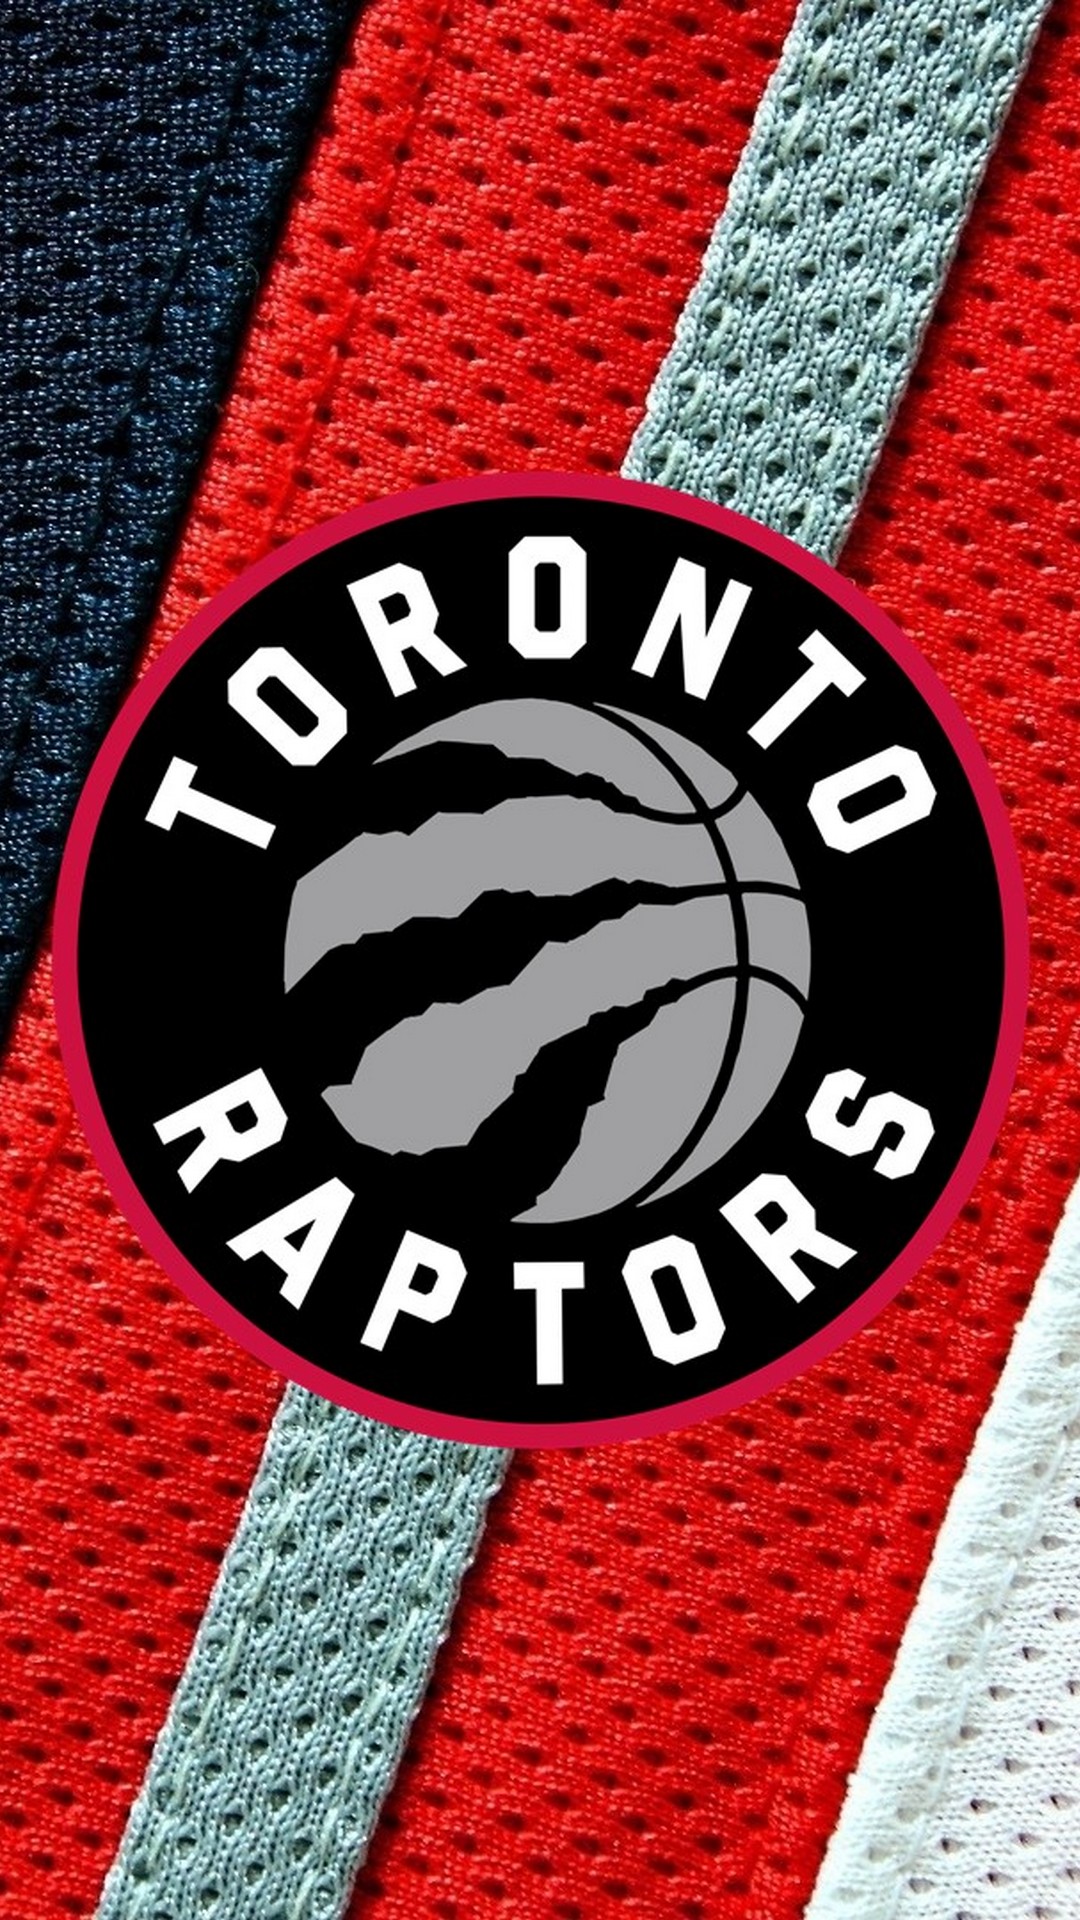 Mobile Wallpapers Toronto Raptors with image resolution 1080x1920 pixel. You can make this wallpaper for your iPhone 5, 6, 7, 8, X backgrounds, Mobile Screensaver, or iPad Lock Screen